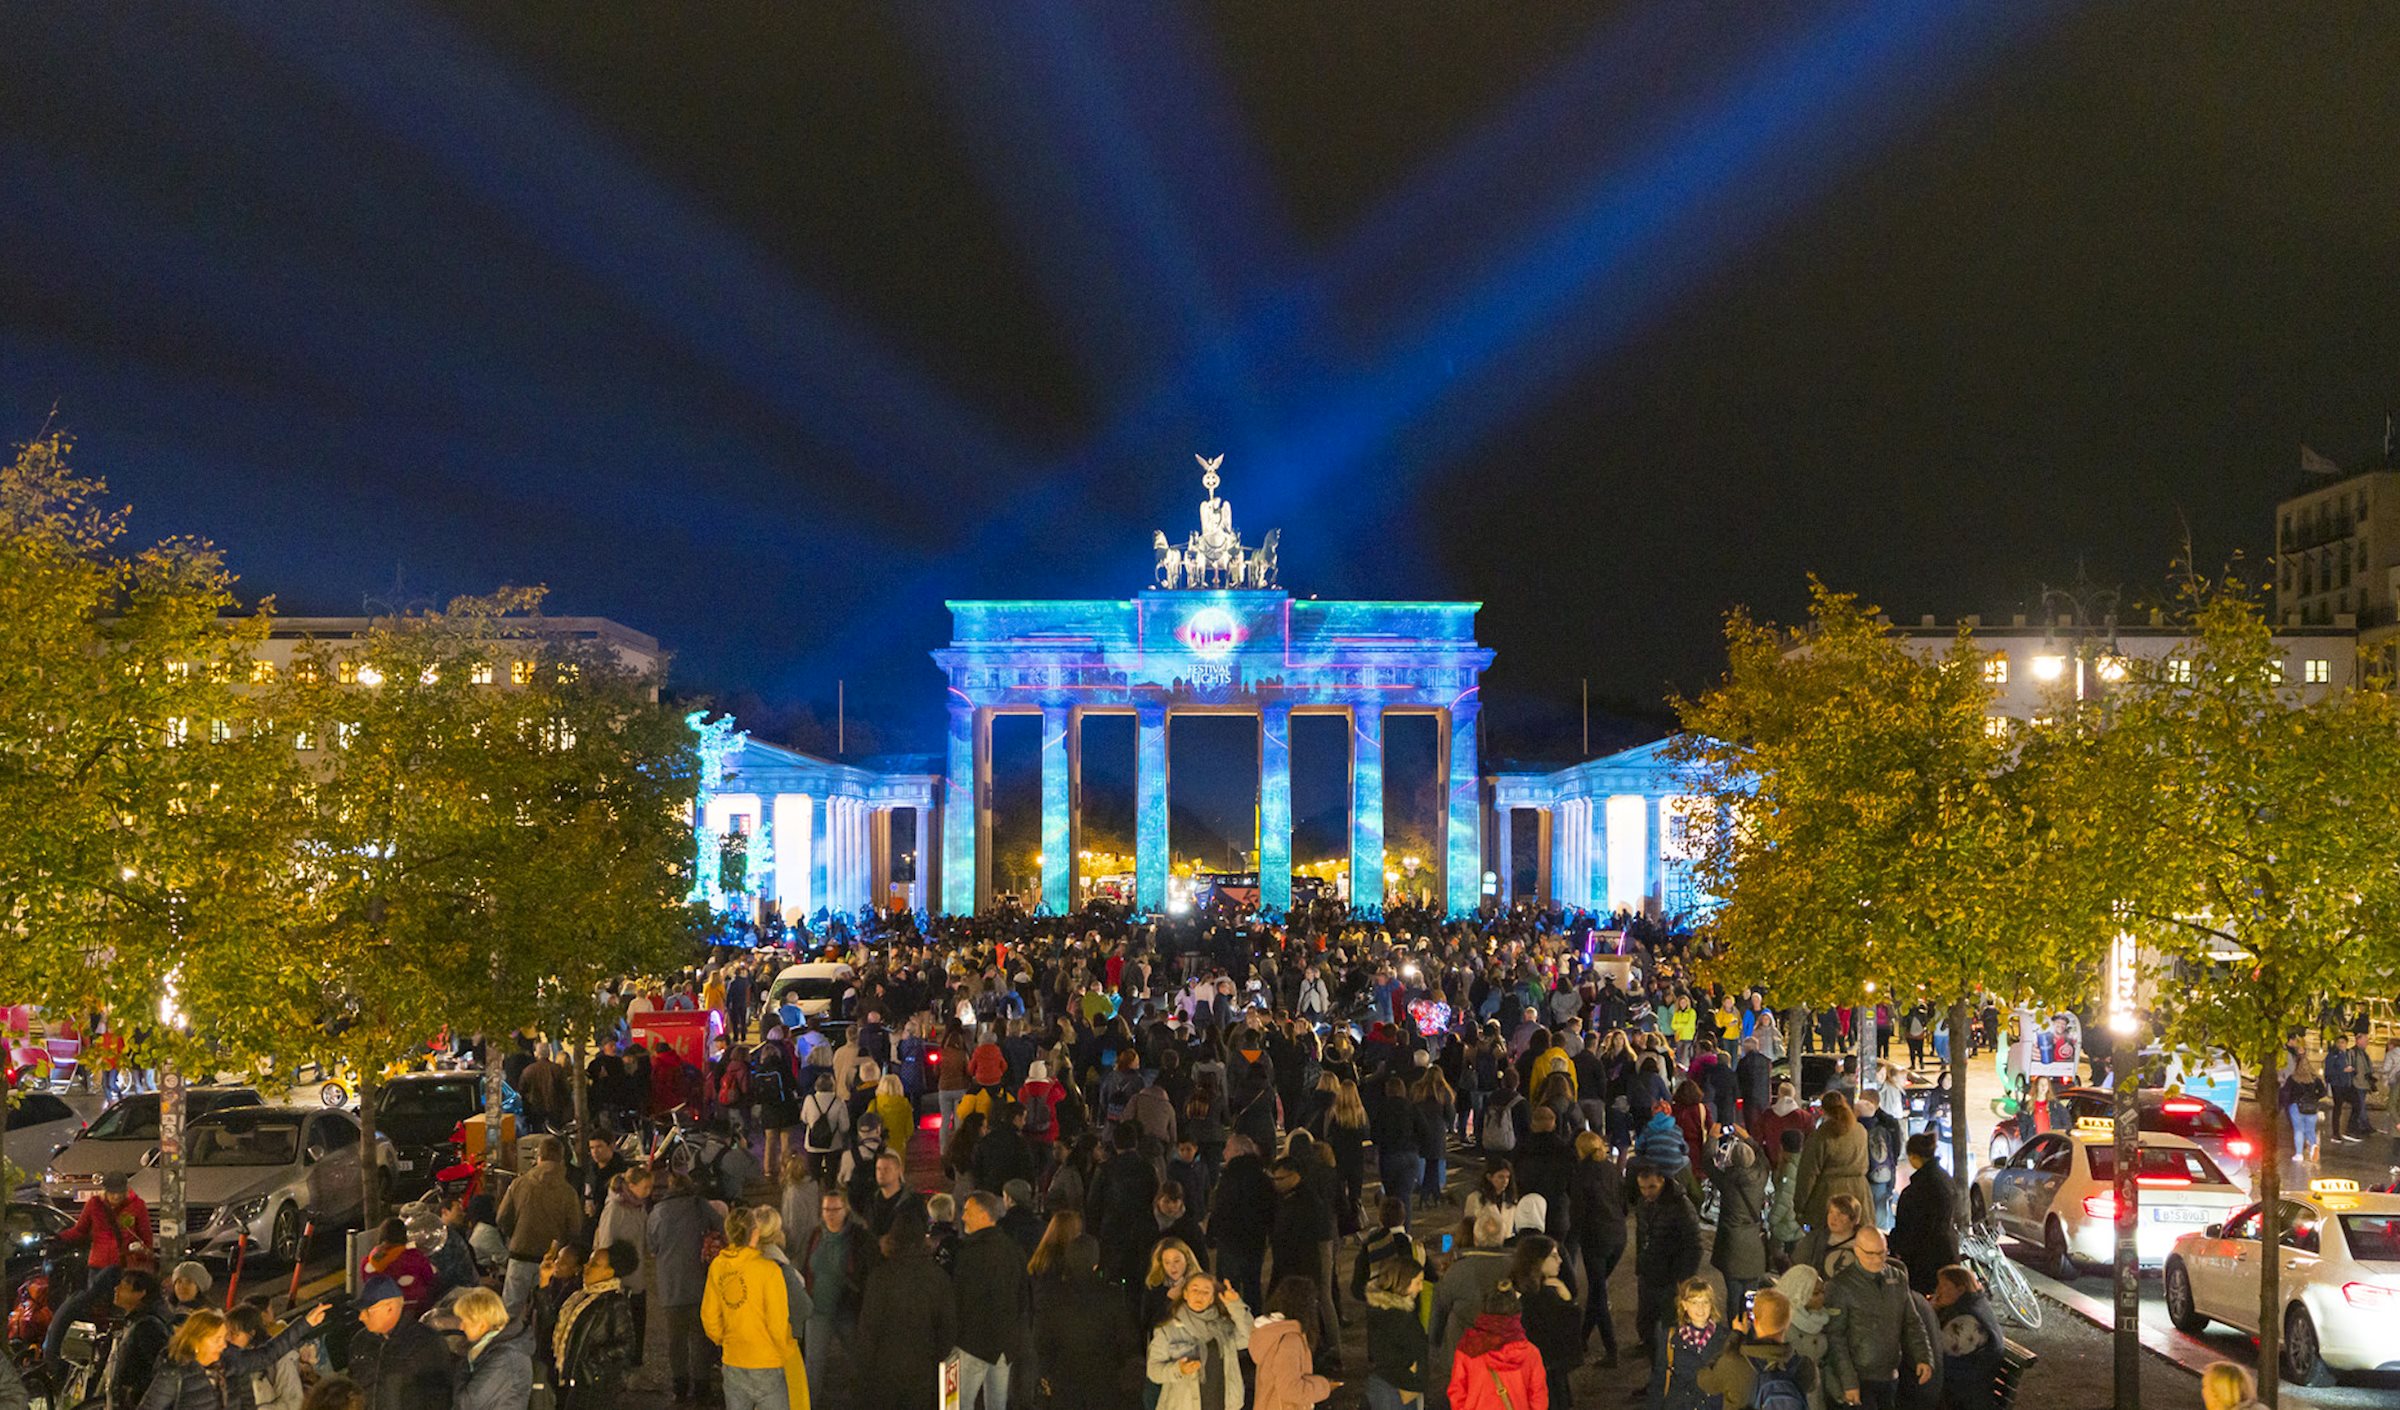 PRG was one of the technology partners and was commissioned to install media and projection technology at eight different locations, including the Brandenburg Gate and the Berlin TV Tower at the Festival of Lights.